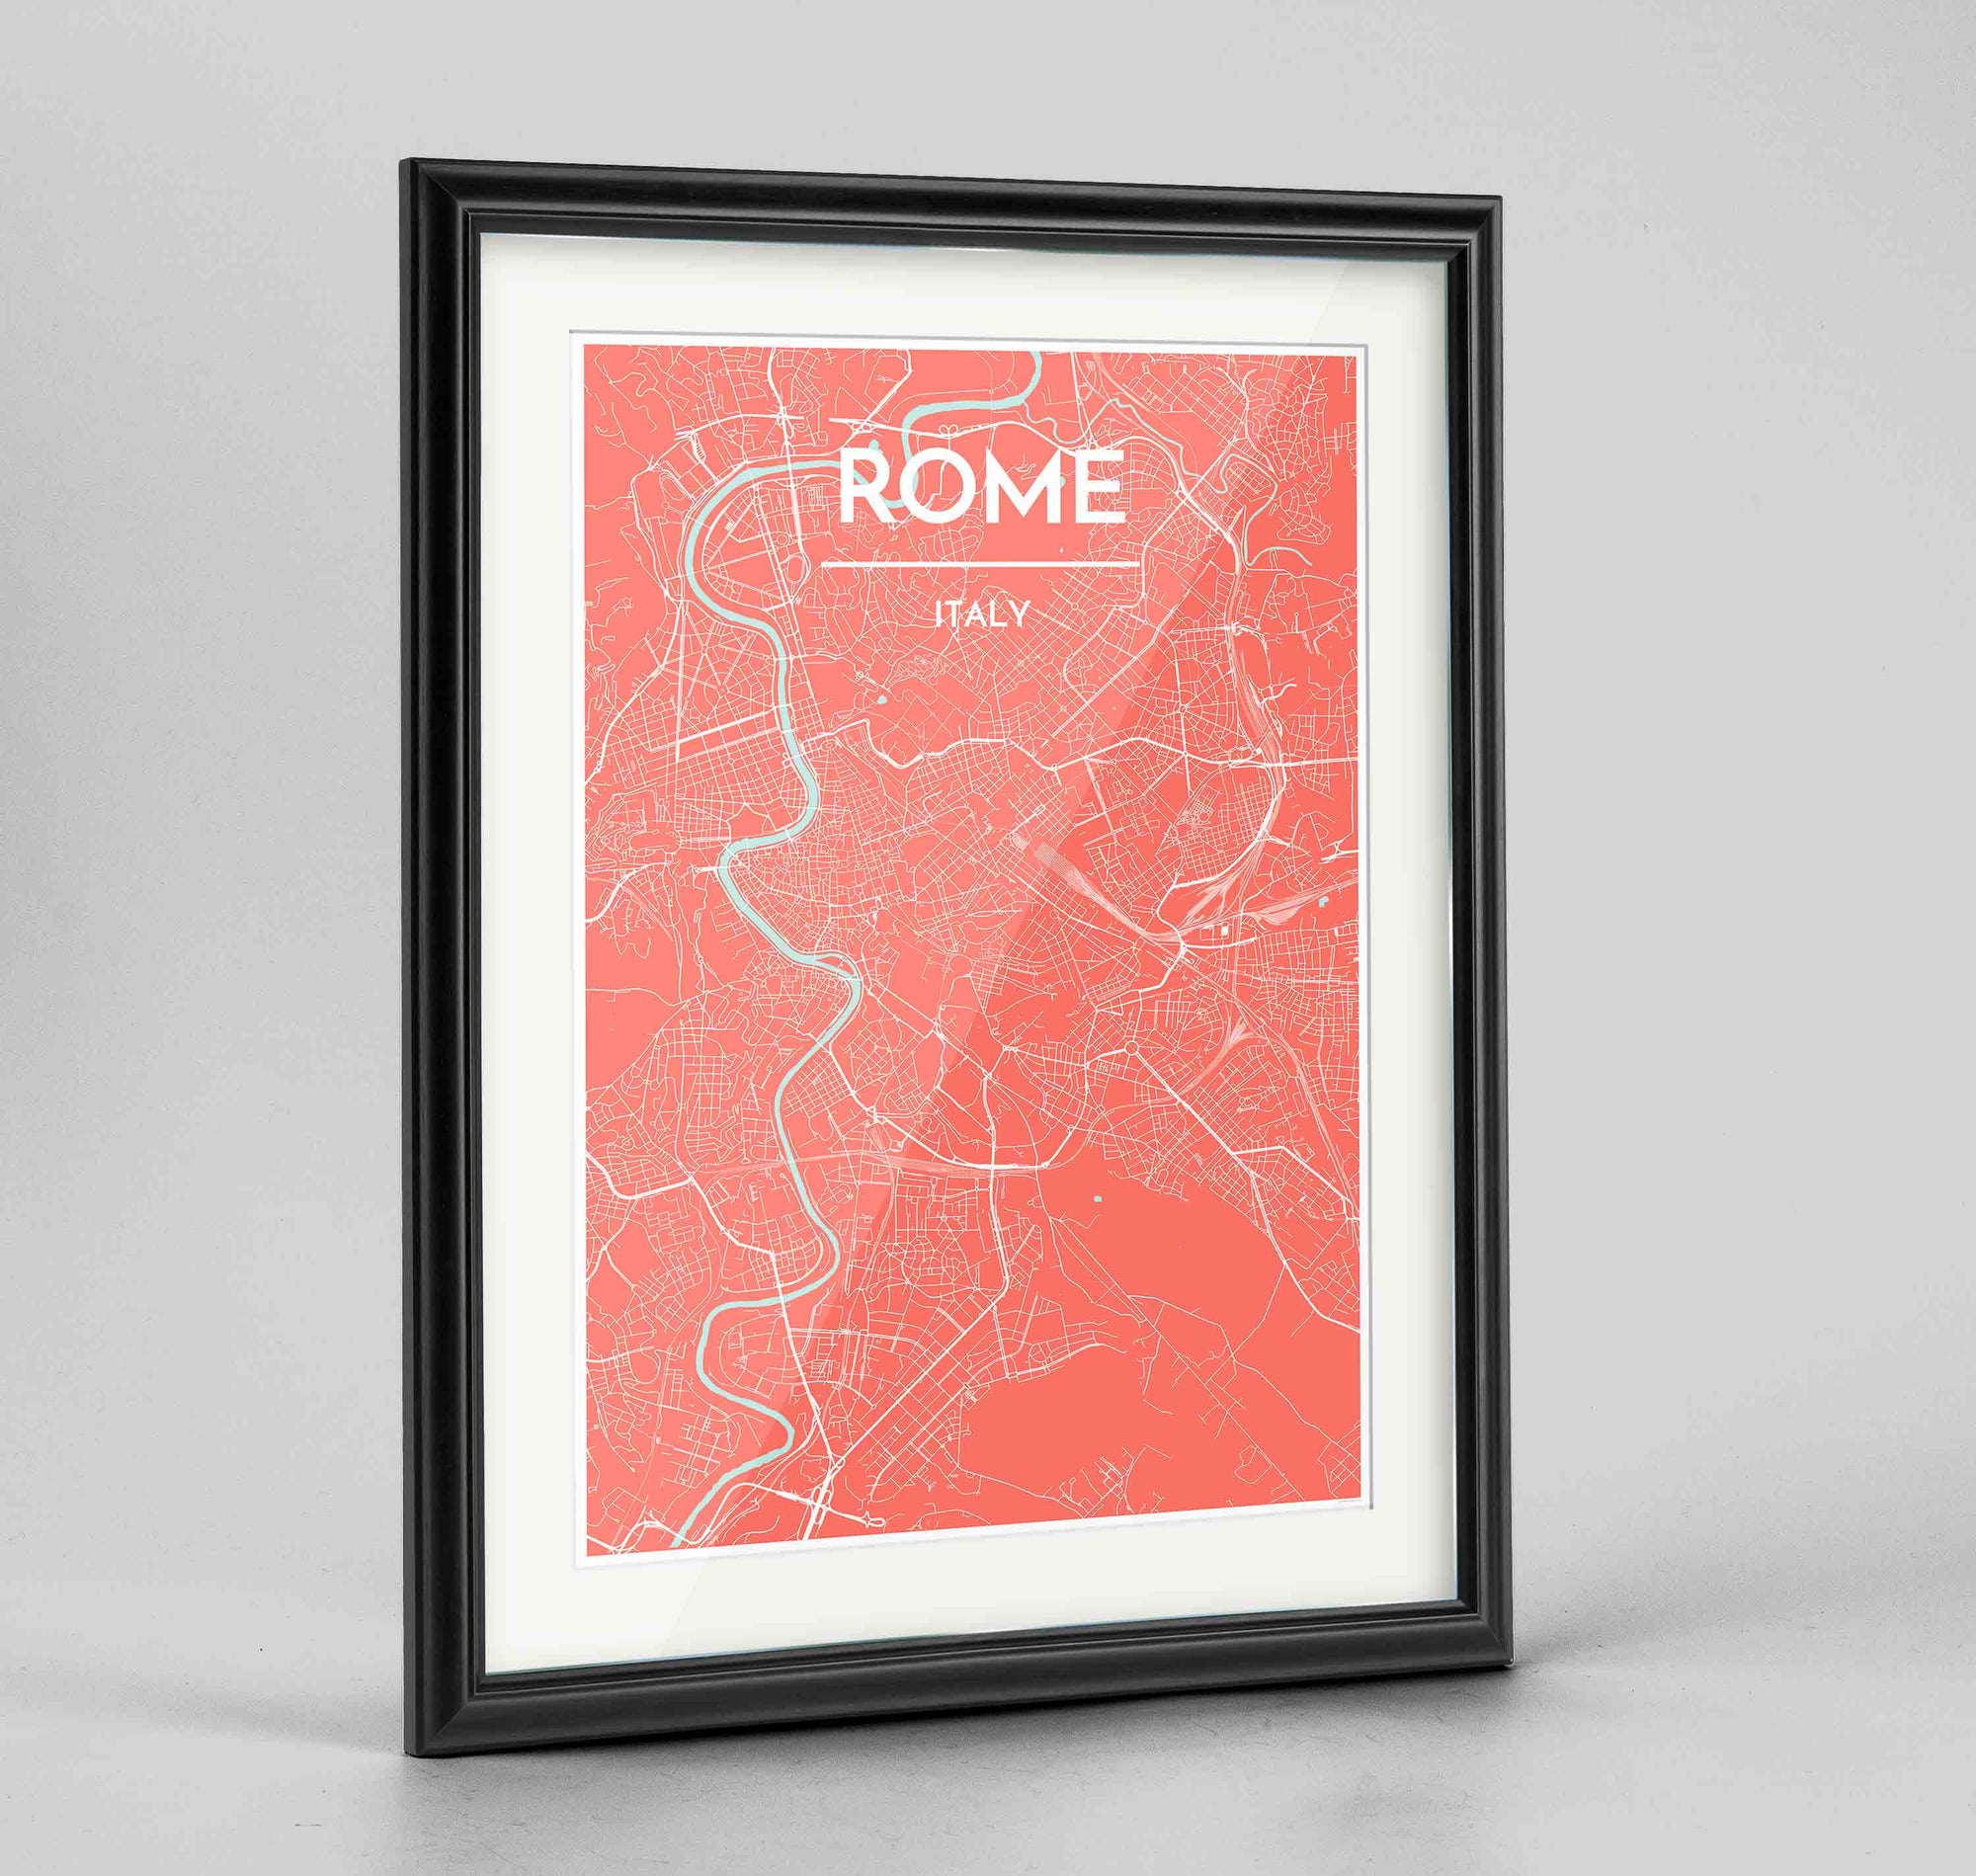 Framed Rome City Map 24x36" Traditional Black frame Point Two Design Group